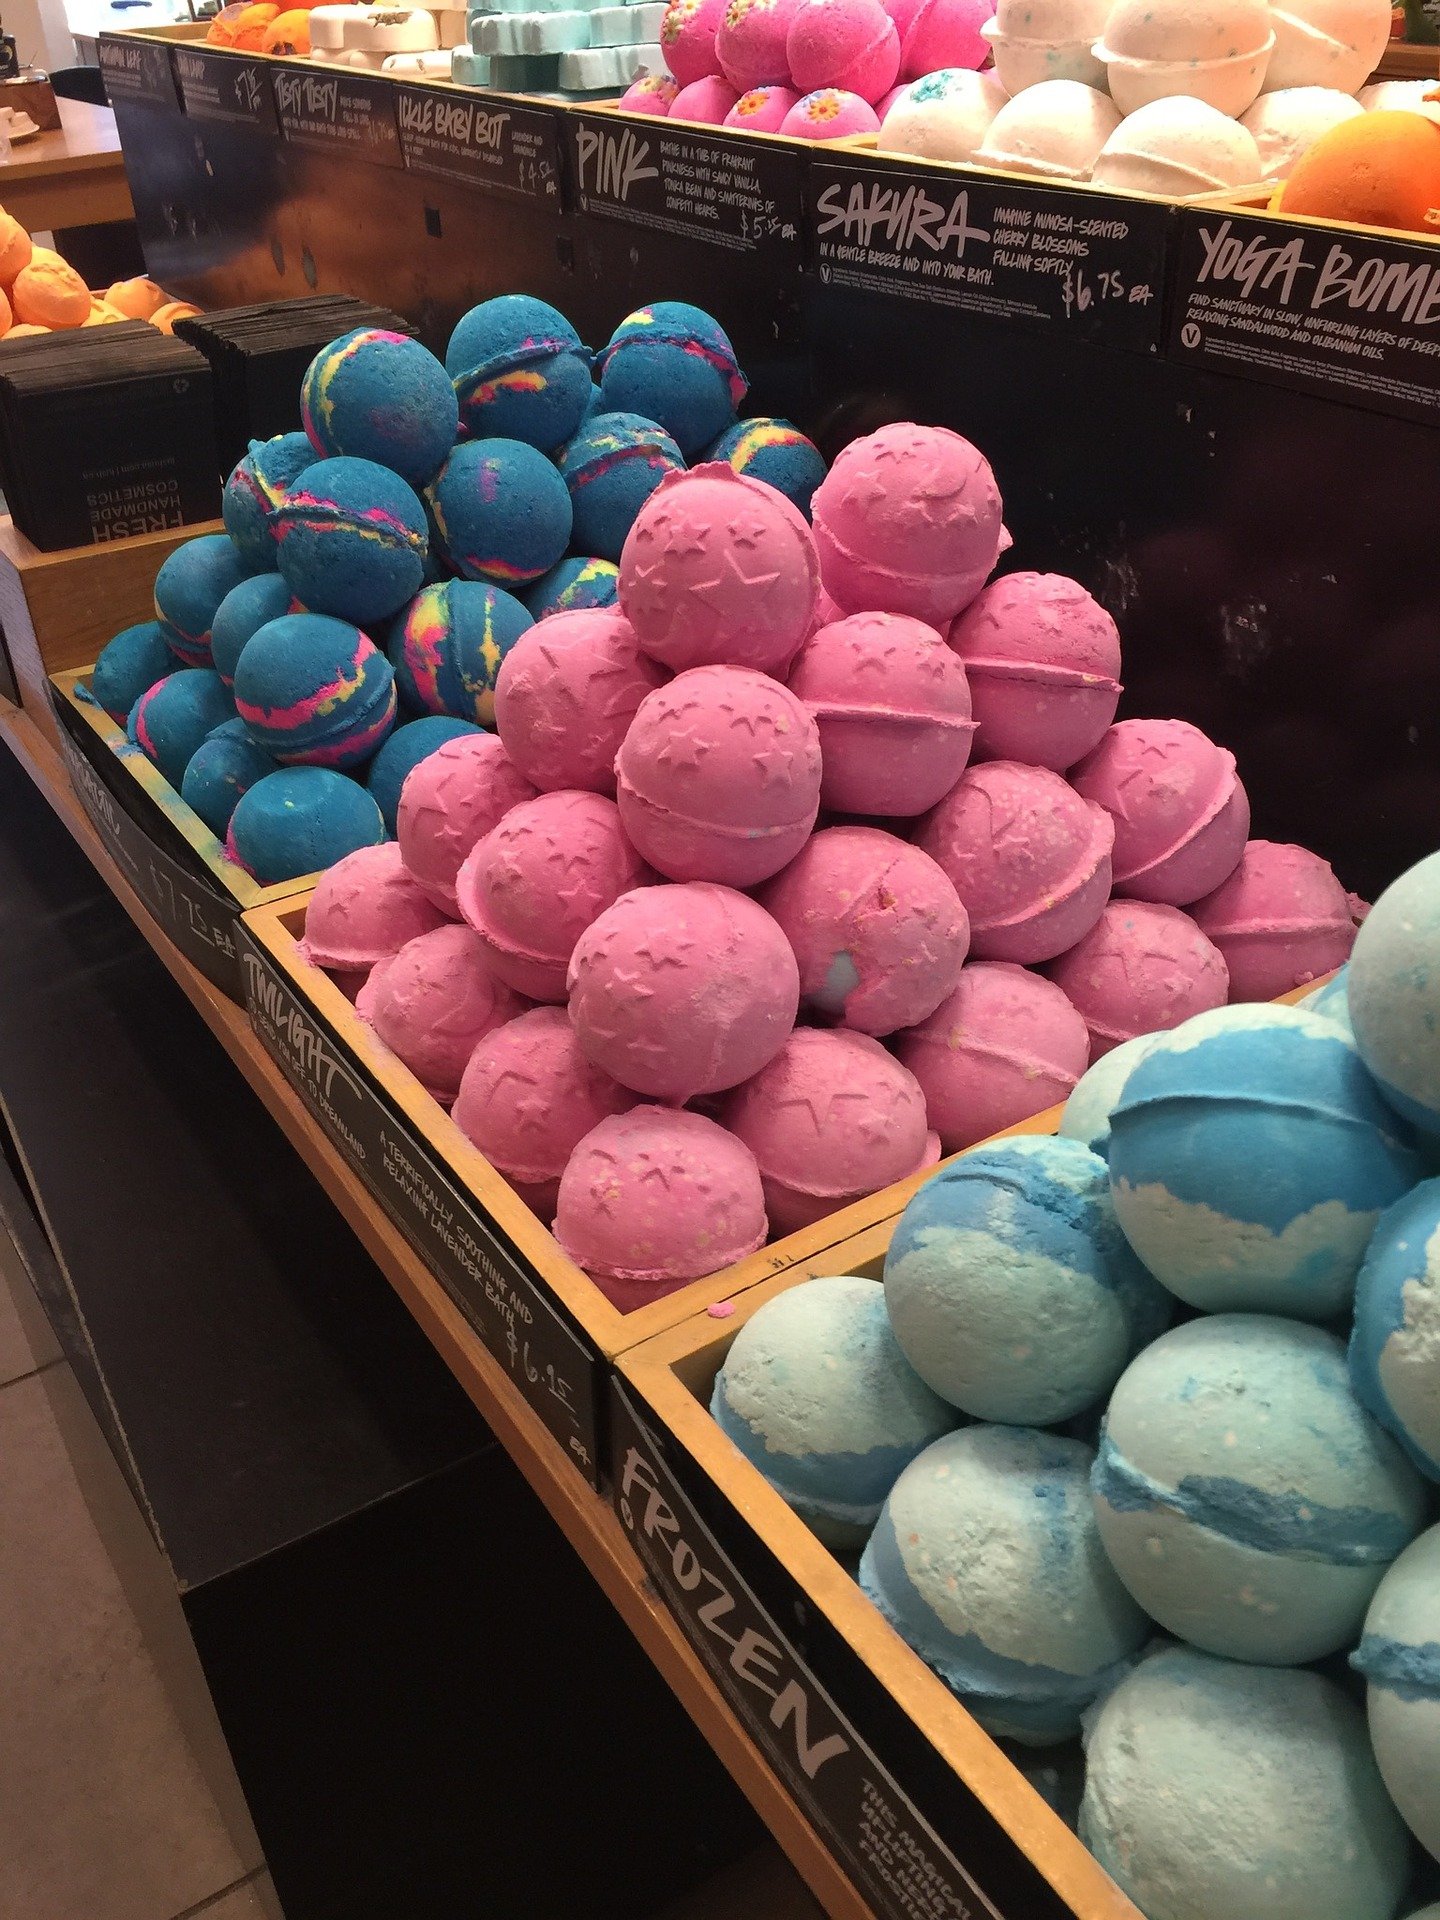 Image of bath bombs in Lush shop.